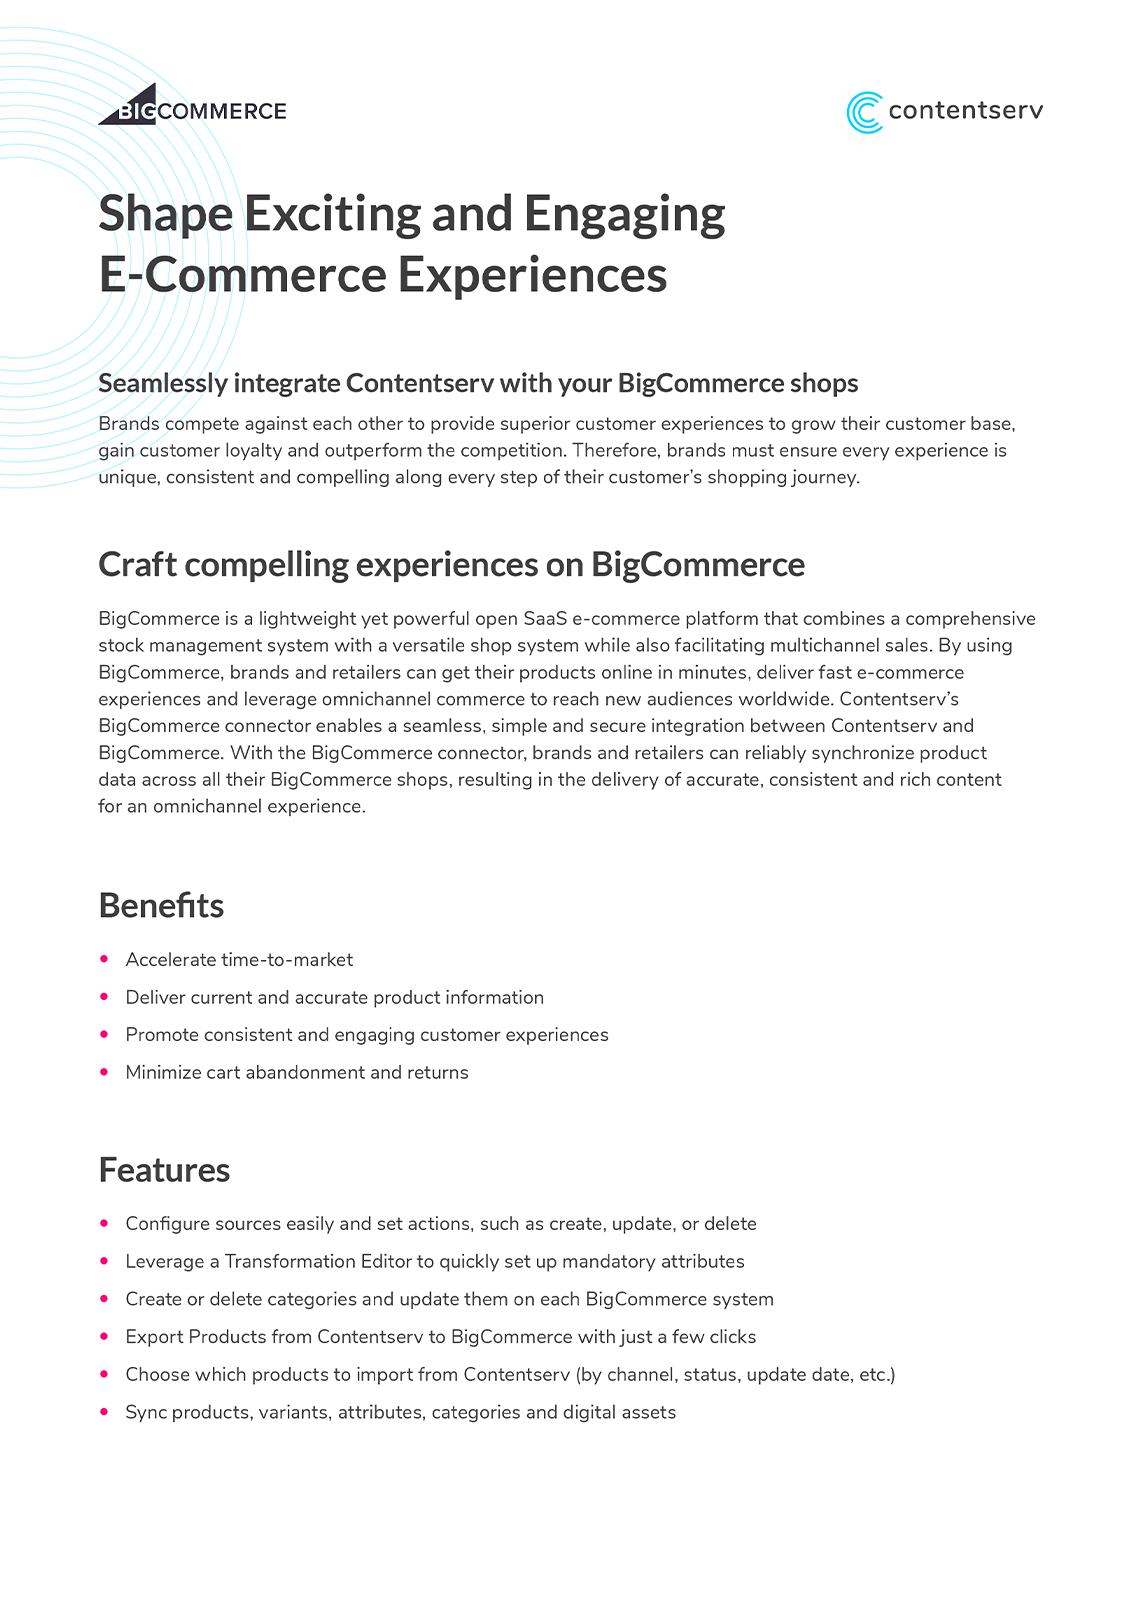 BigCommerce Connector: Craft Compelling Customer Experiences on Your Shops